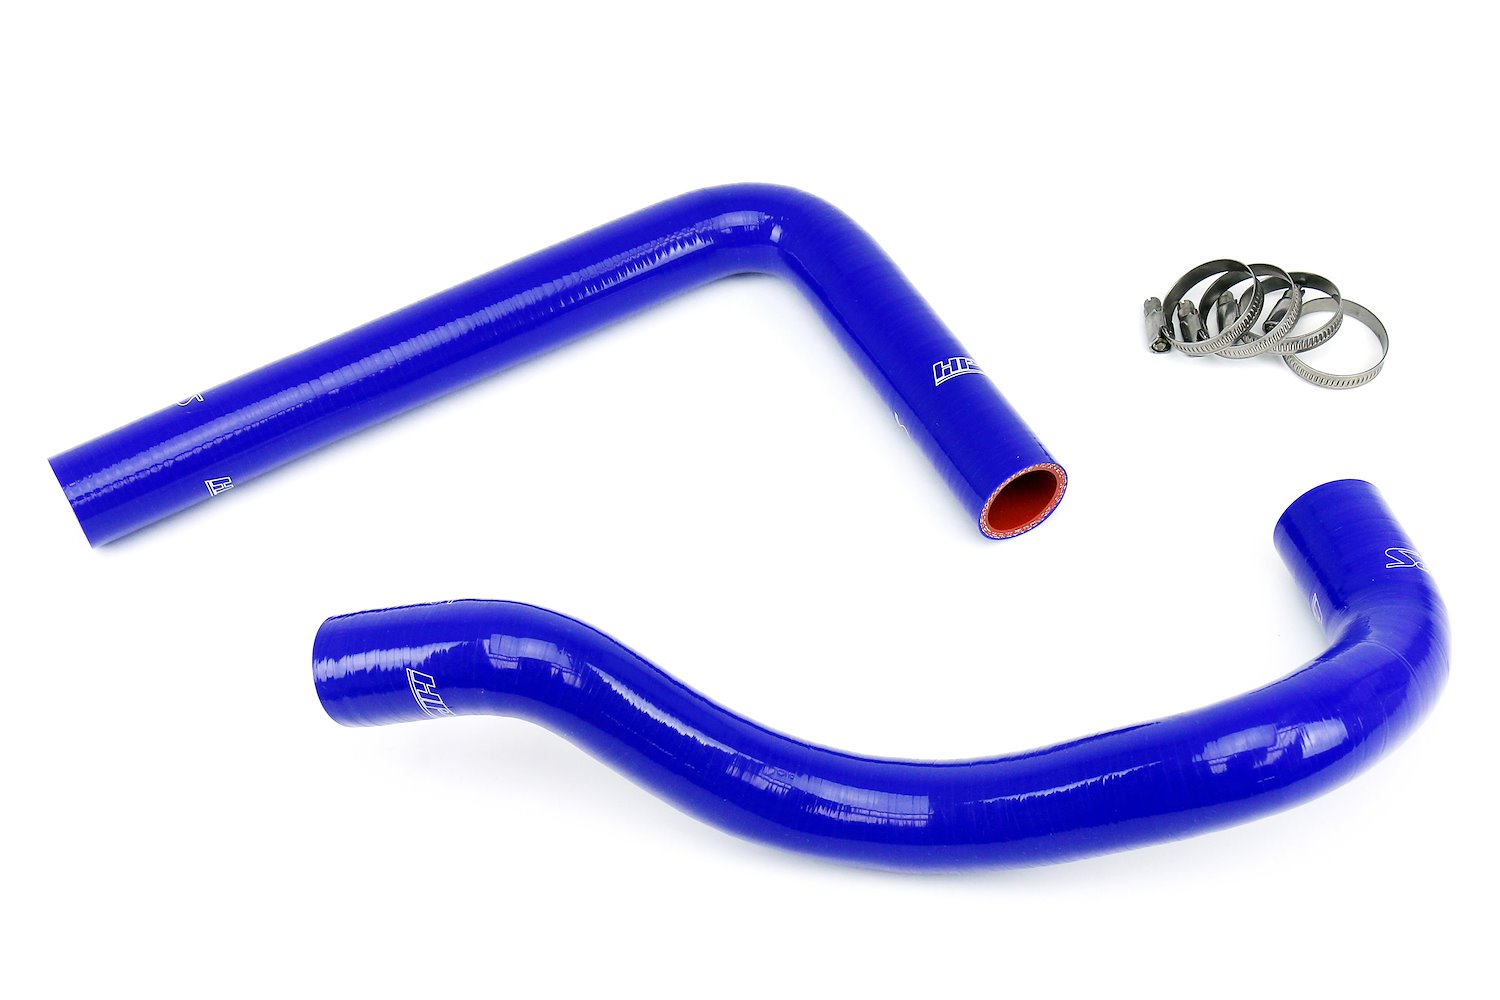 57-1924-BLUE Radiator Hose Kit, 3-Ply Reinforced Silicone, Replaces Rubber Radiator Coolant Hoses